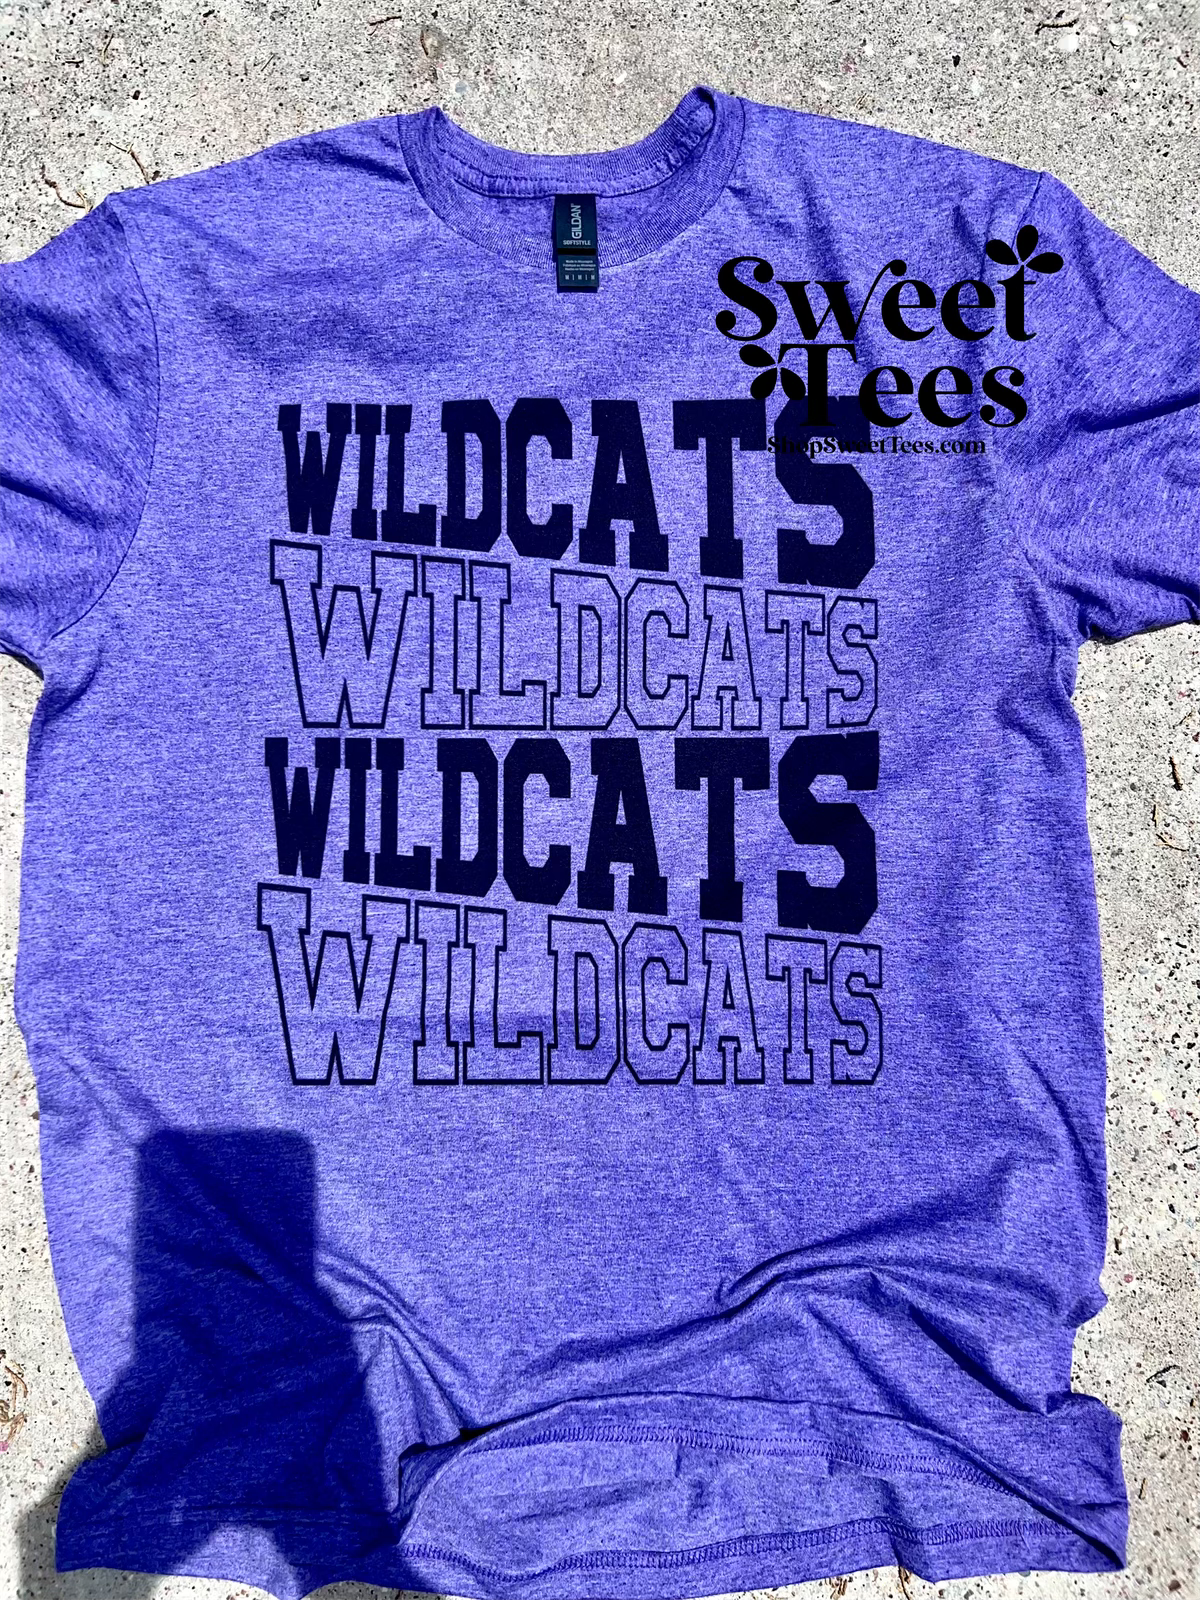 Big Sandy Wildcats In and Out - PURPLE tee